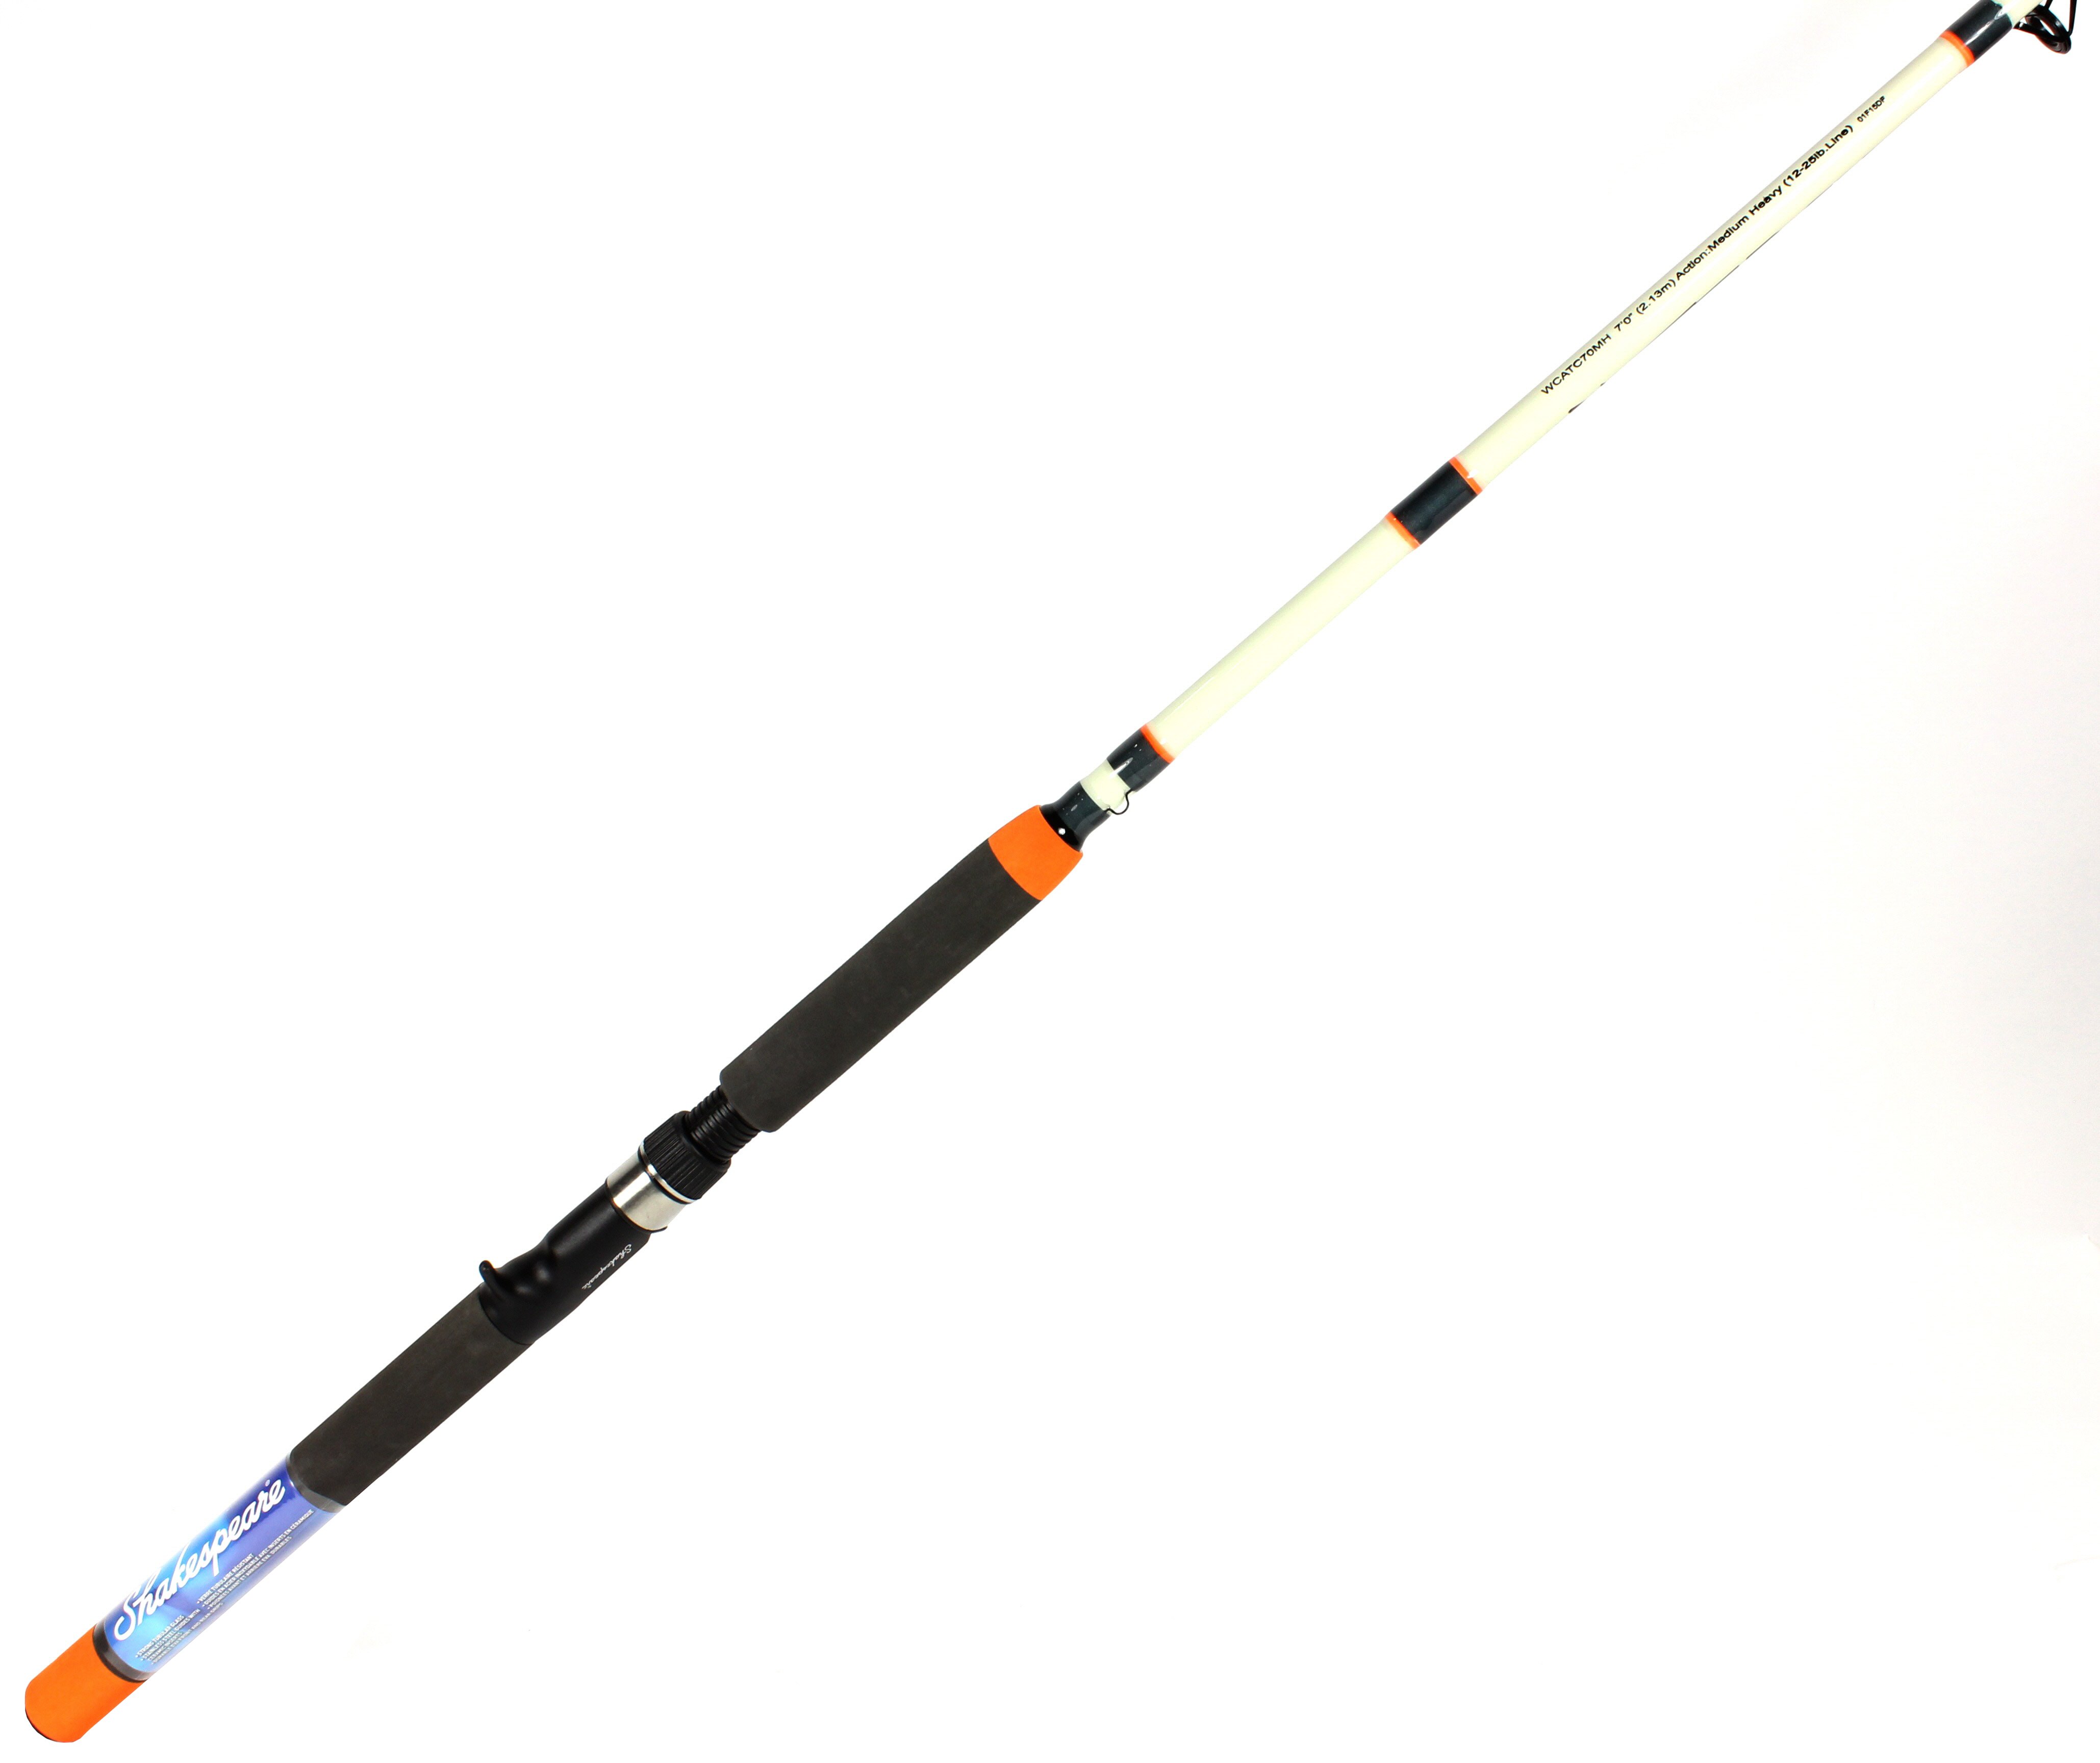 Shakespeare 7' Wildcat Casting Rod - Shop Fishing at H-E-B